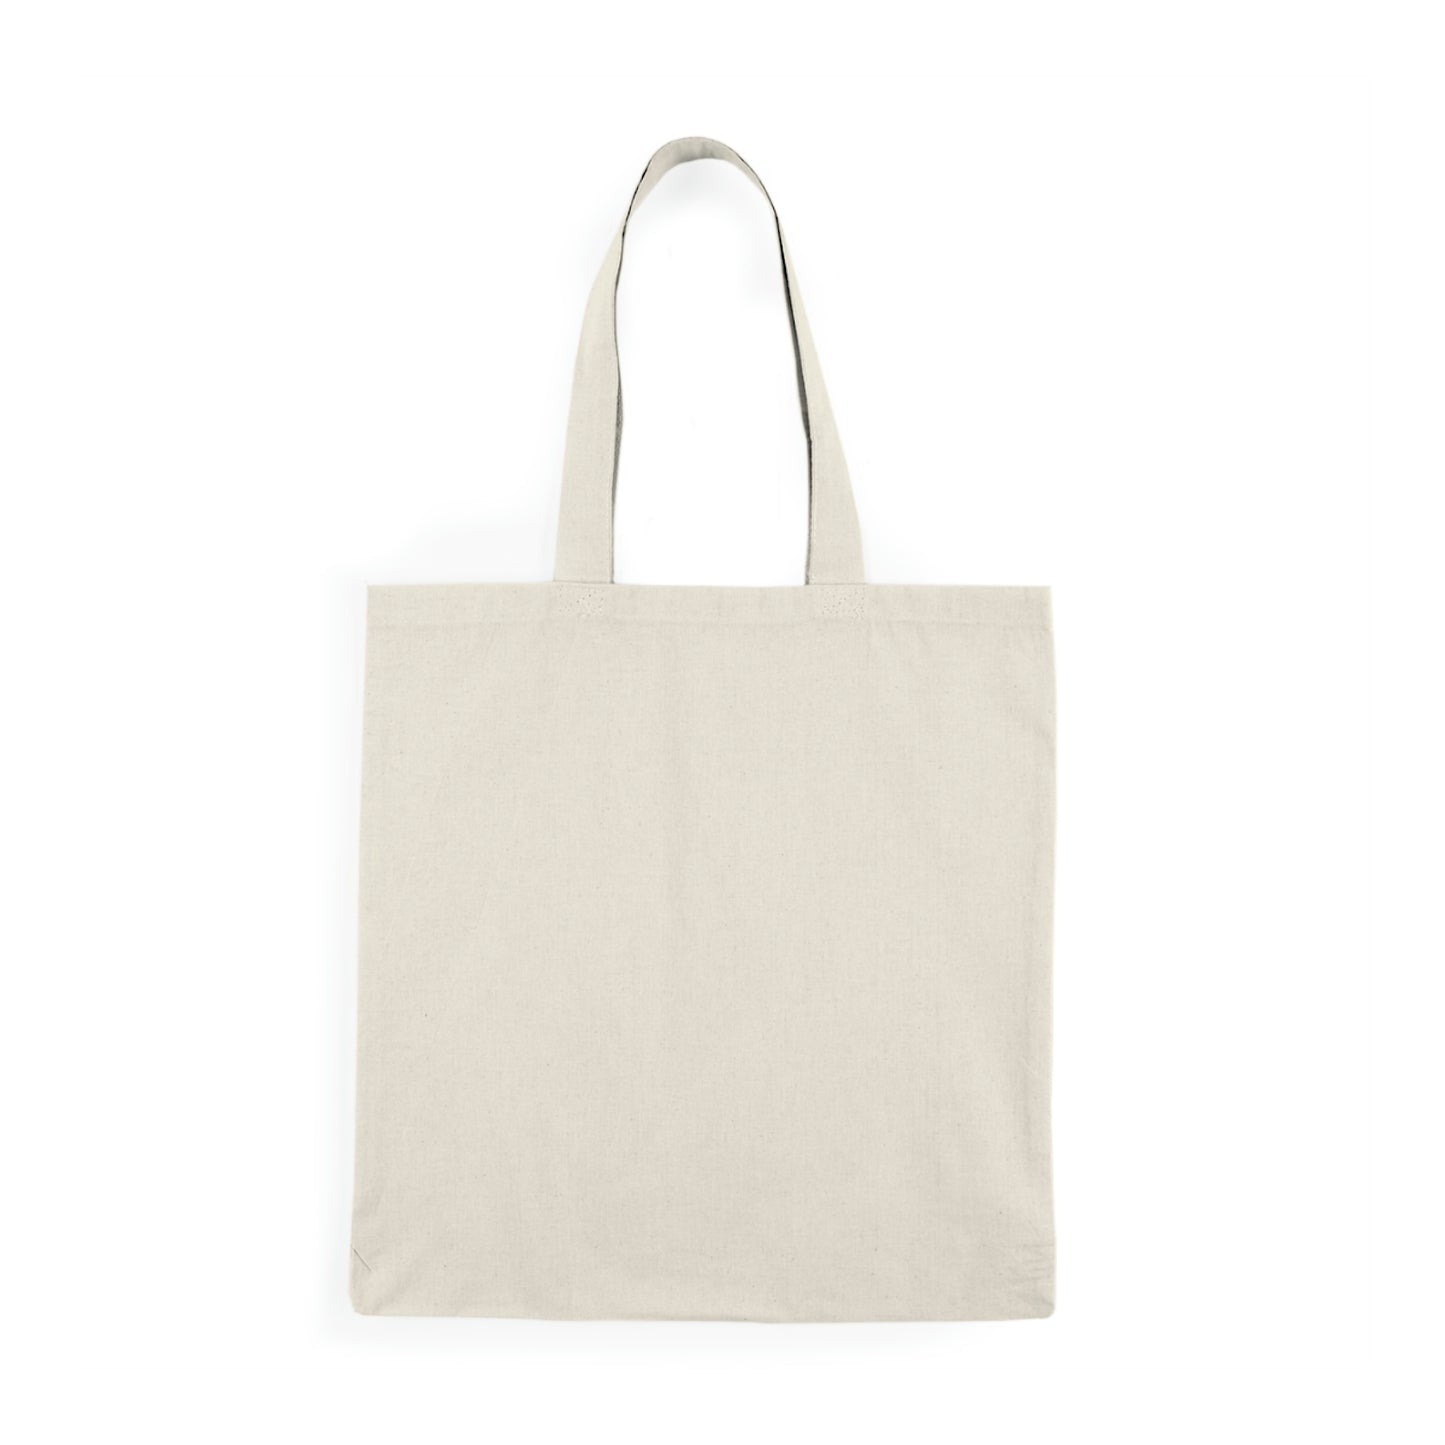 They Came In The Night - Natural Tote Bag